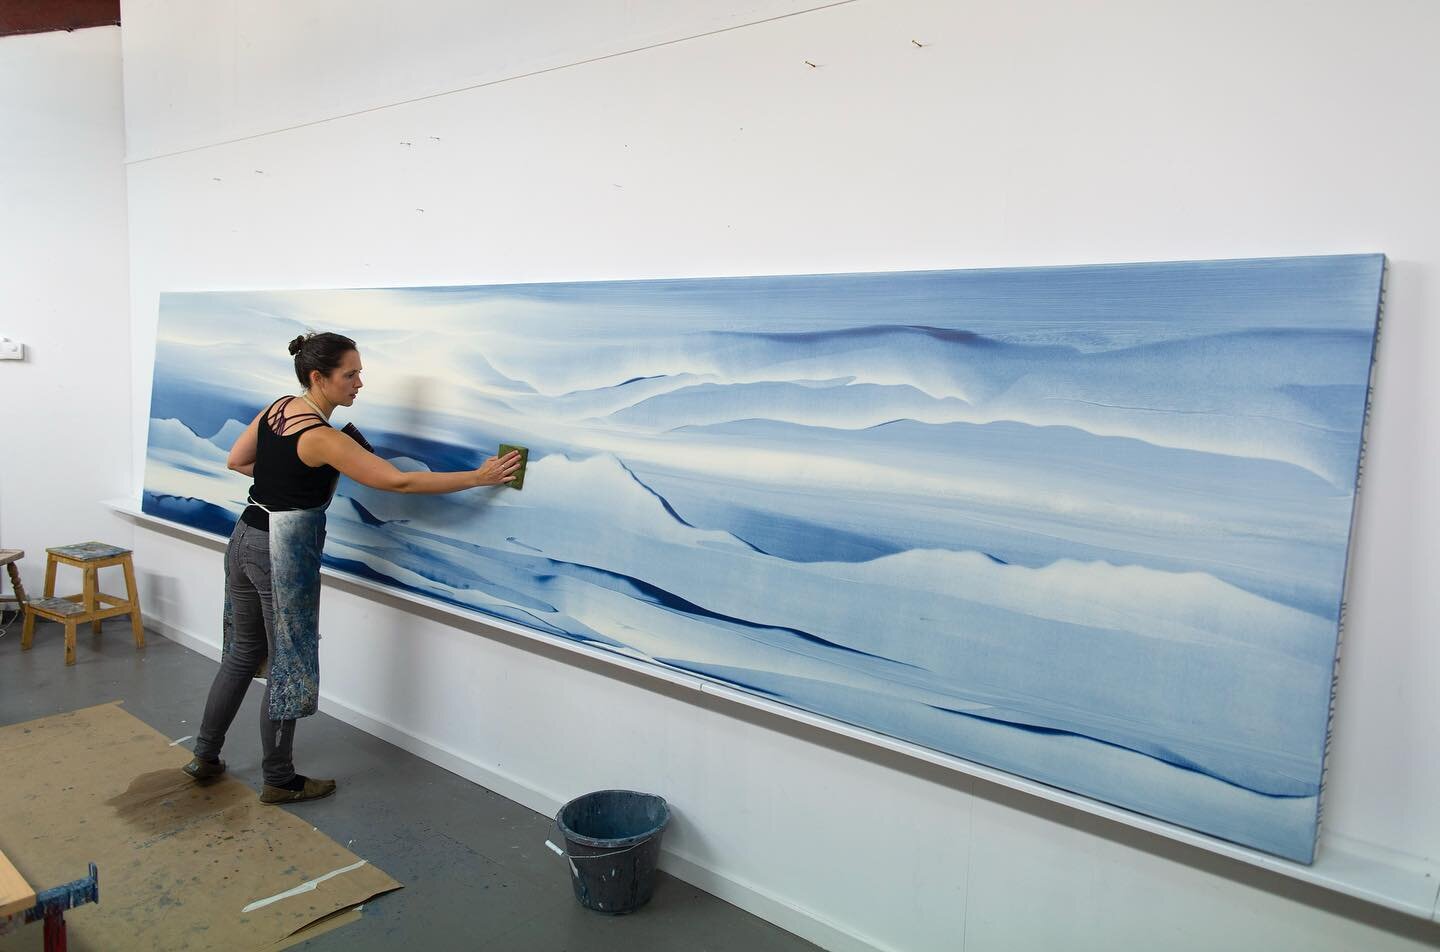 Putting on the finishing touches to my latest painting

&lsquo;Cloud break&rsquo; - 5.2 m x 1.1 m - acrylic on canvas

Available to buy in my Studio Sale Auction via @theauctioncollective 

Bidding closes 4pm (GMT) next Wednesday 9th February 

#stud